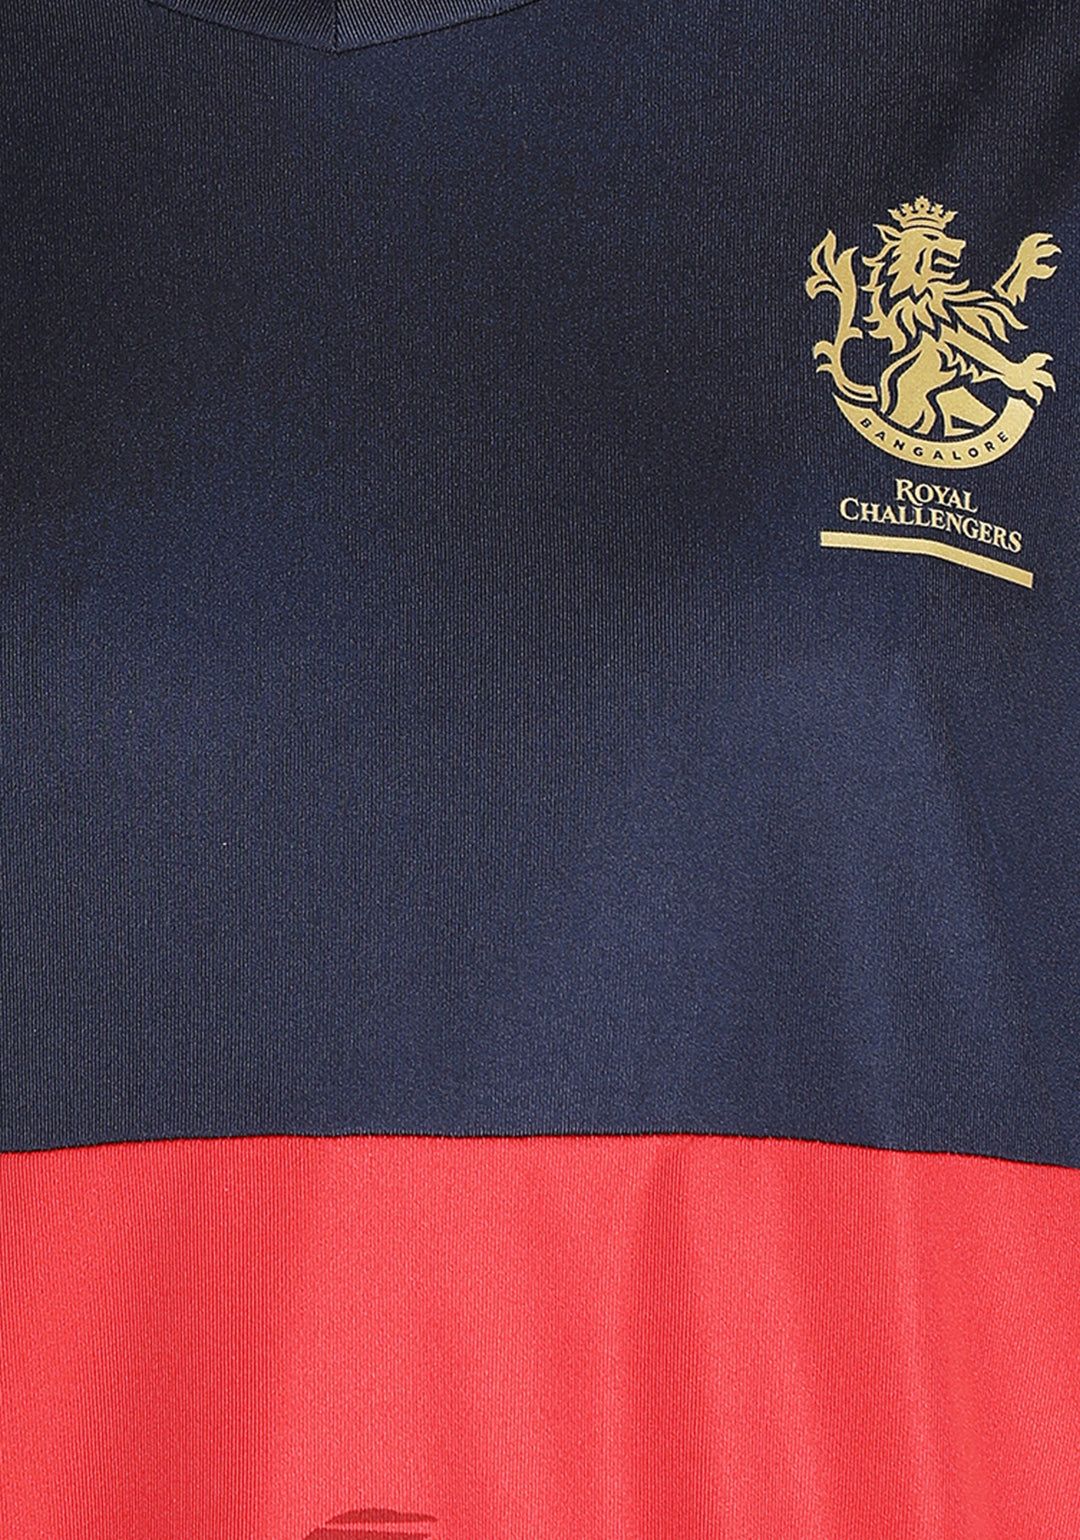 Buy Women Navy Blue and Red RCB Take Down Jersey From Fancode Shop.